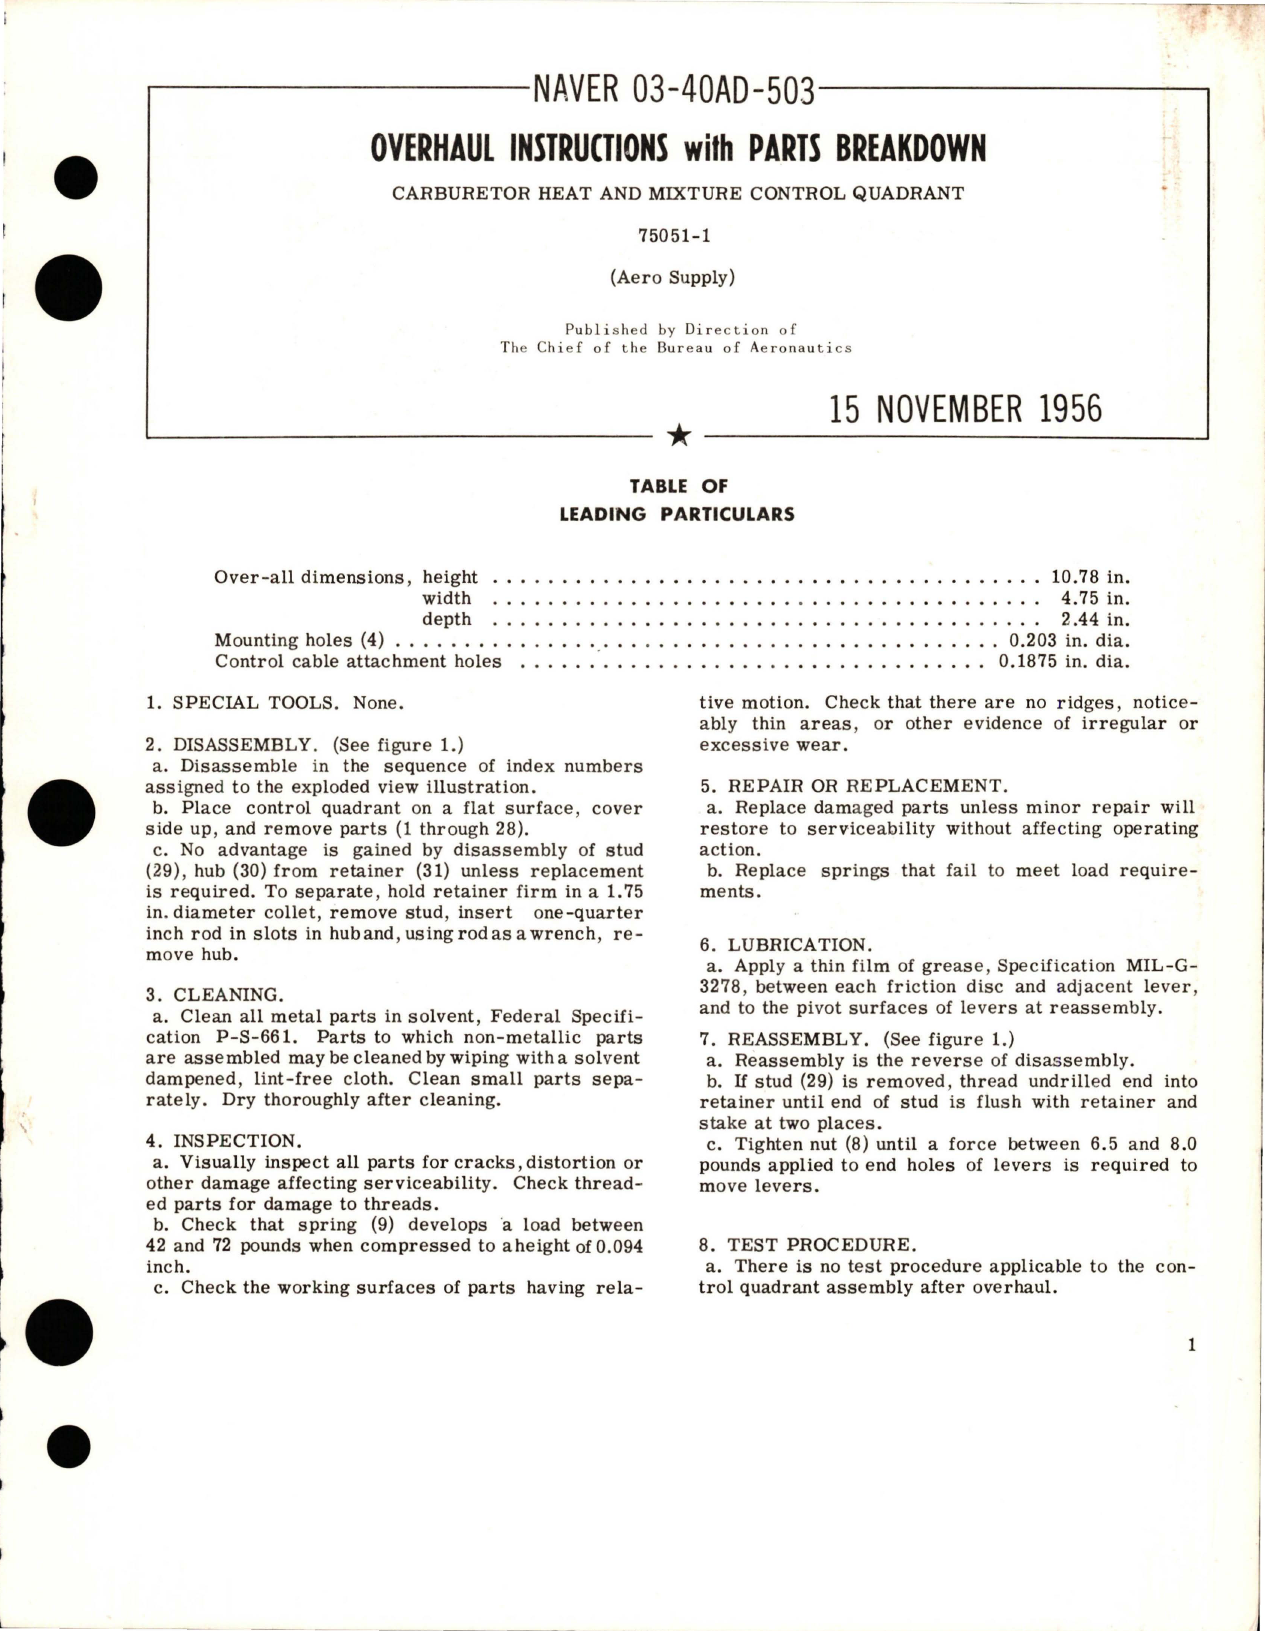 Sample page 1 from AirCorps Library document: Overhaul Instructions with Parts Breakdown for Carburetor Heat & Mixture Control Quadrant - 75051-1